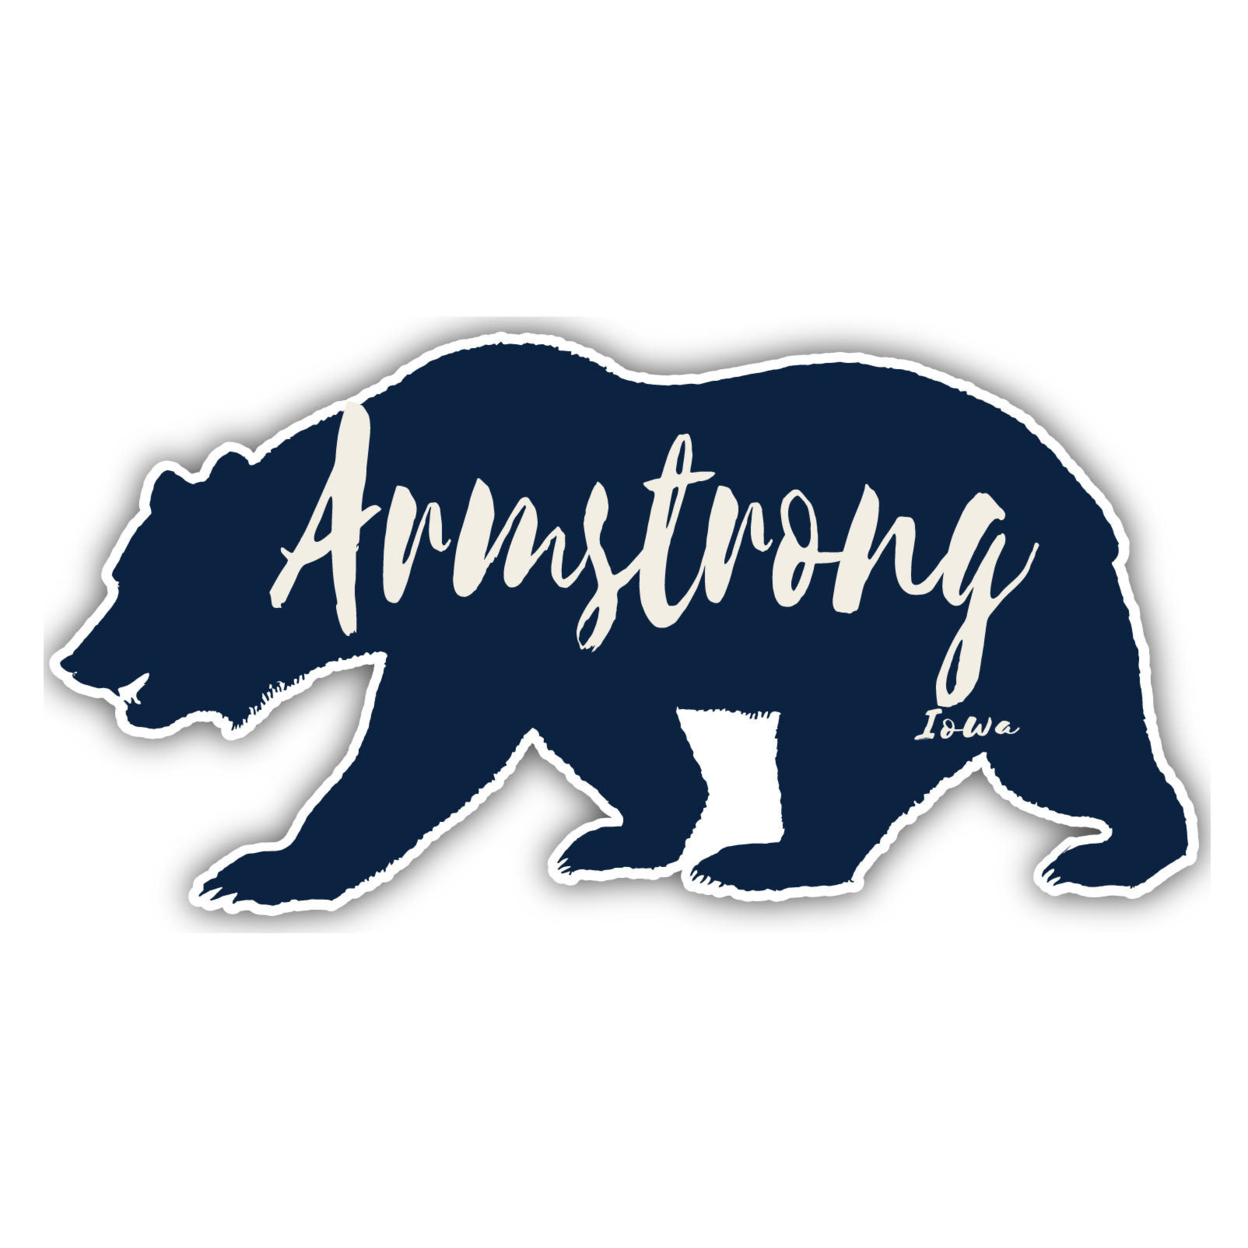 Armstrong Iowa Souvenir Decorative Stickers (Choose Theme And Size) - Single Unit, 2-Inch, Bear